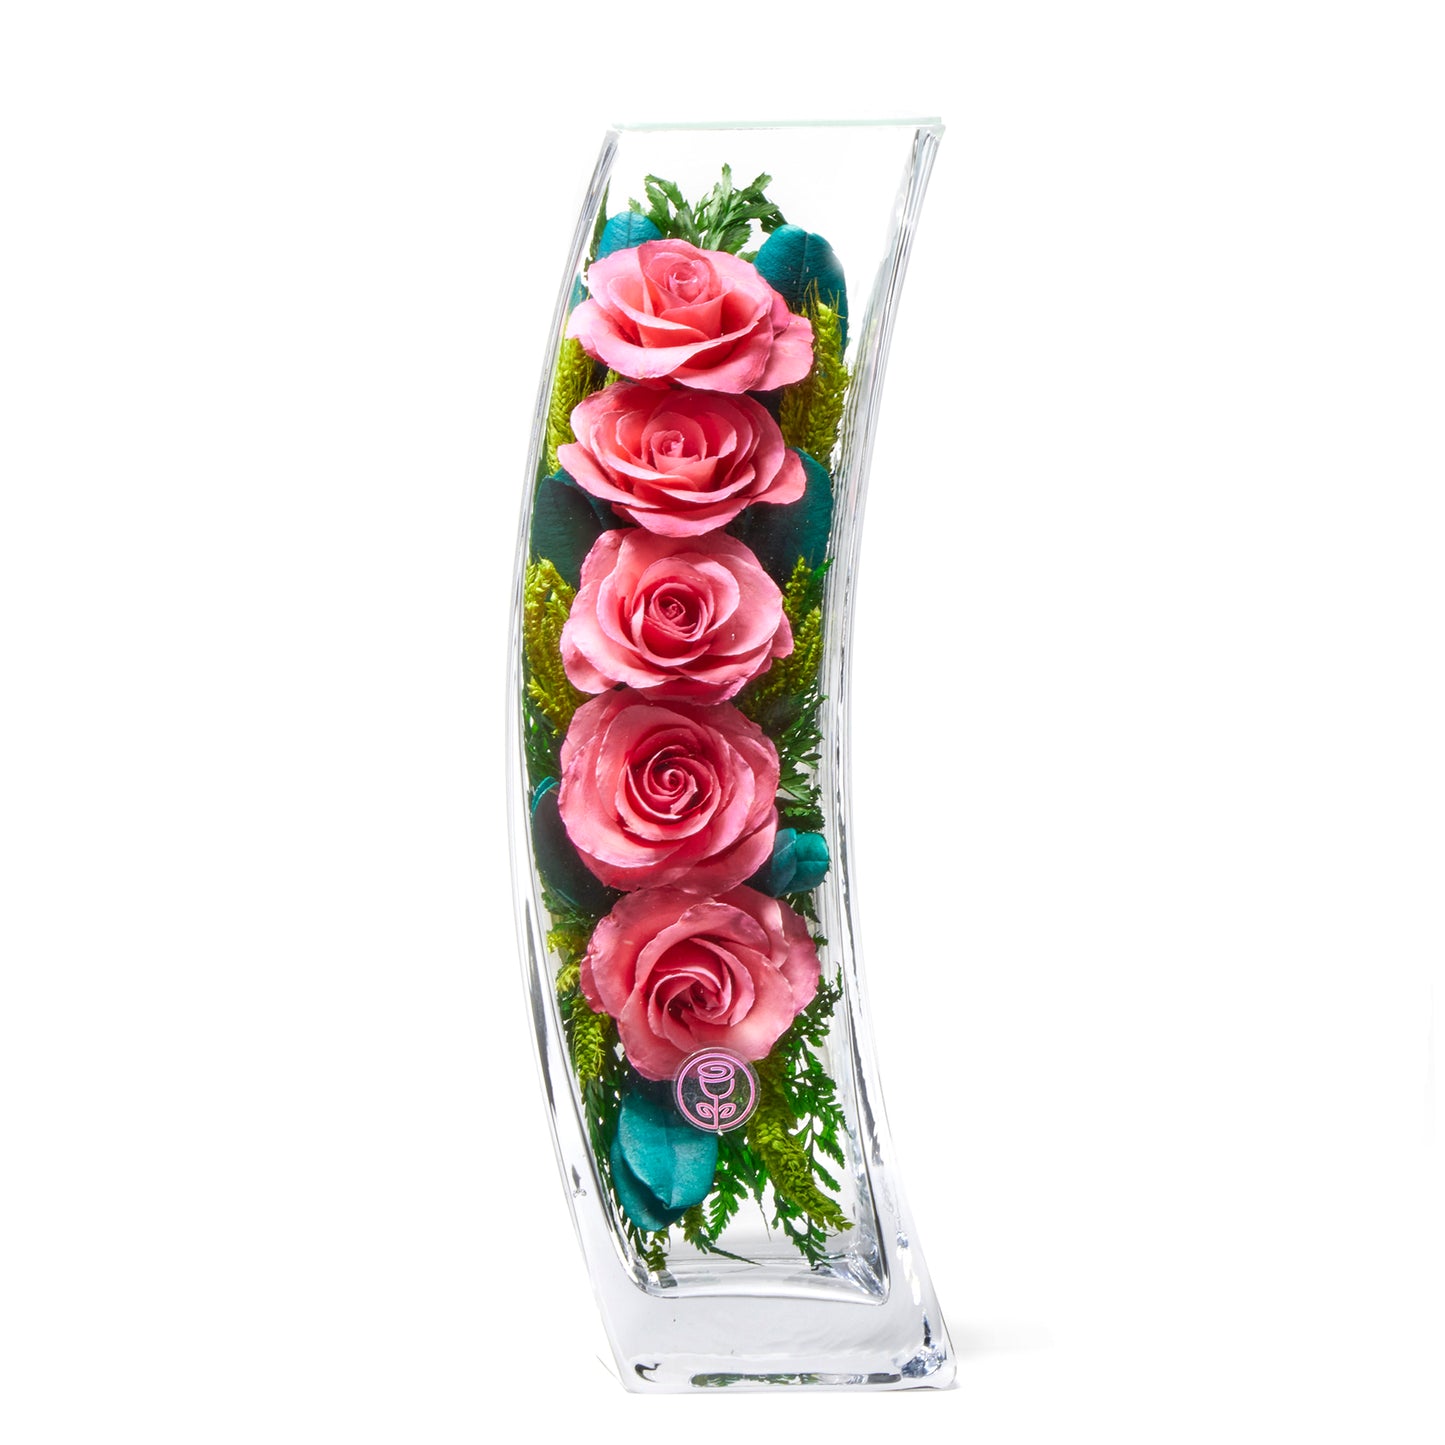 FOMO Love Roses: Petals You Won't Want to Miss Out On